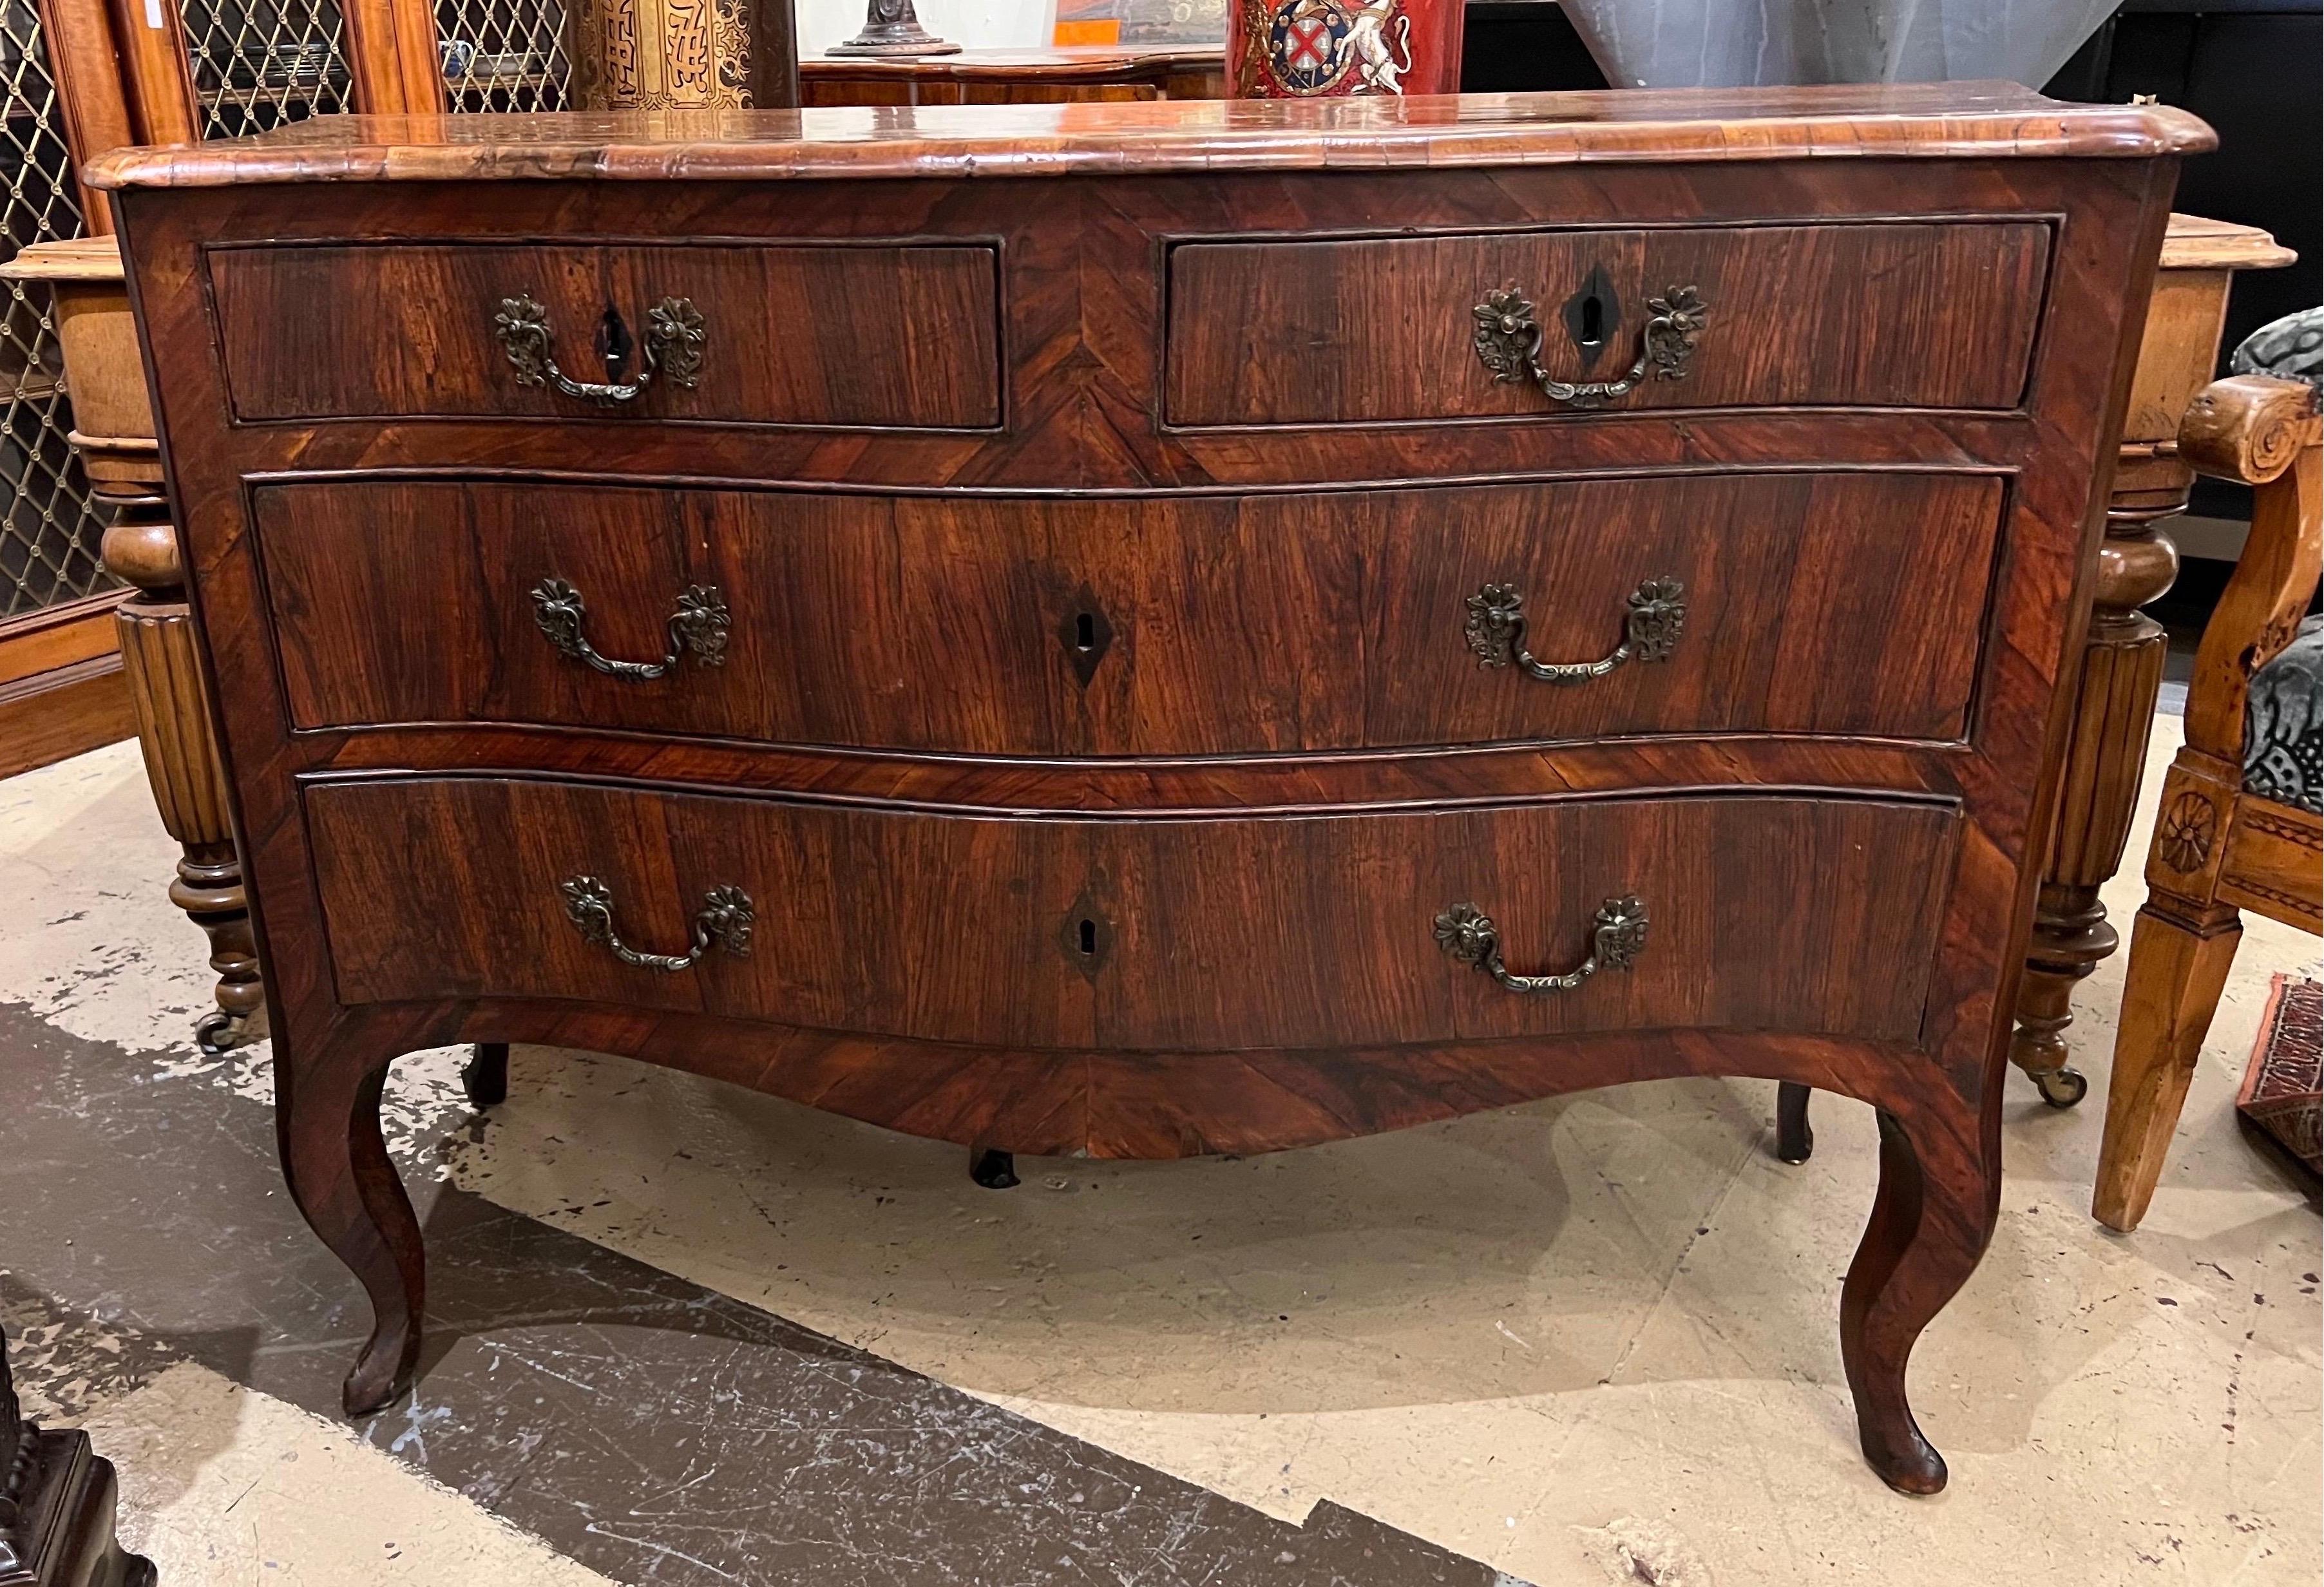 Gorgeous 18th century Swedish rococo inlaid chest of drawers. Diamond inlaid eschuteons, crossbanded top and original pulls on cabriole legs.